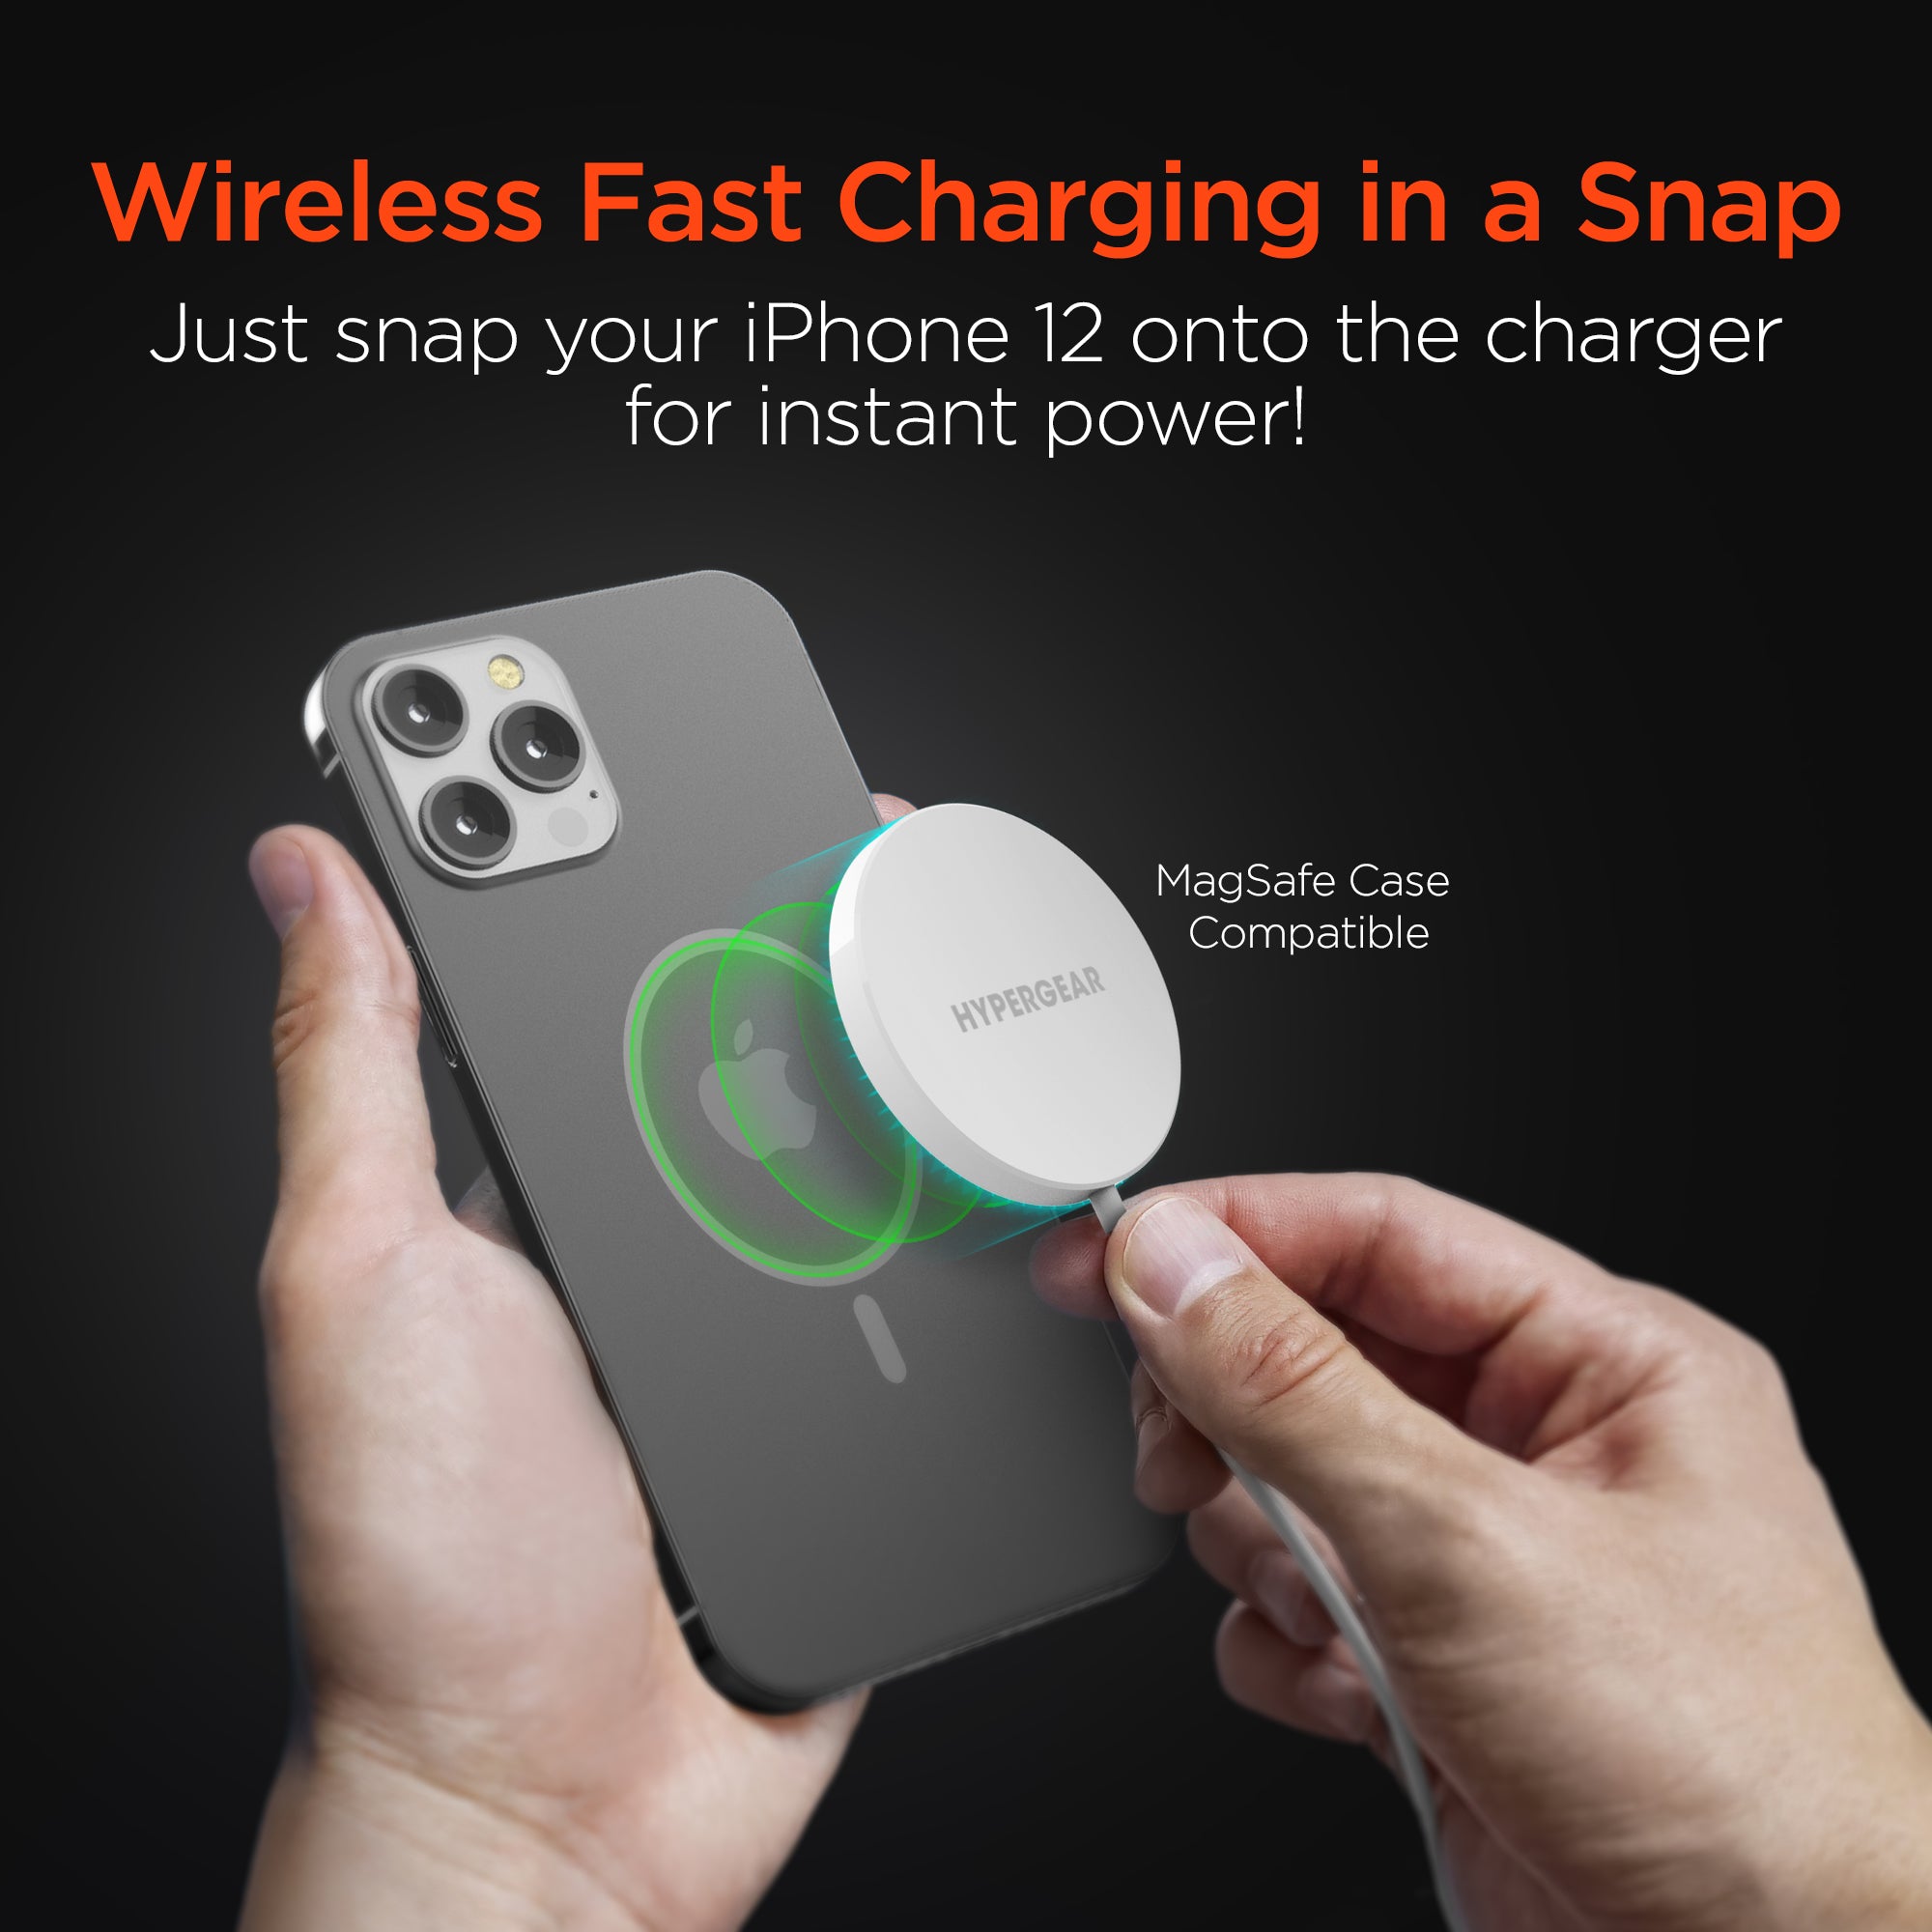  iPhone Magnetic Wireless Charger - Super Fast Mag Safe